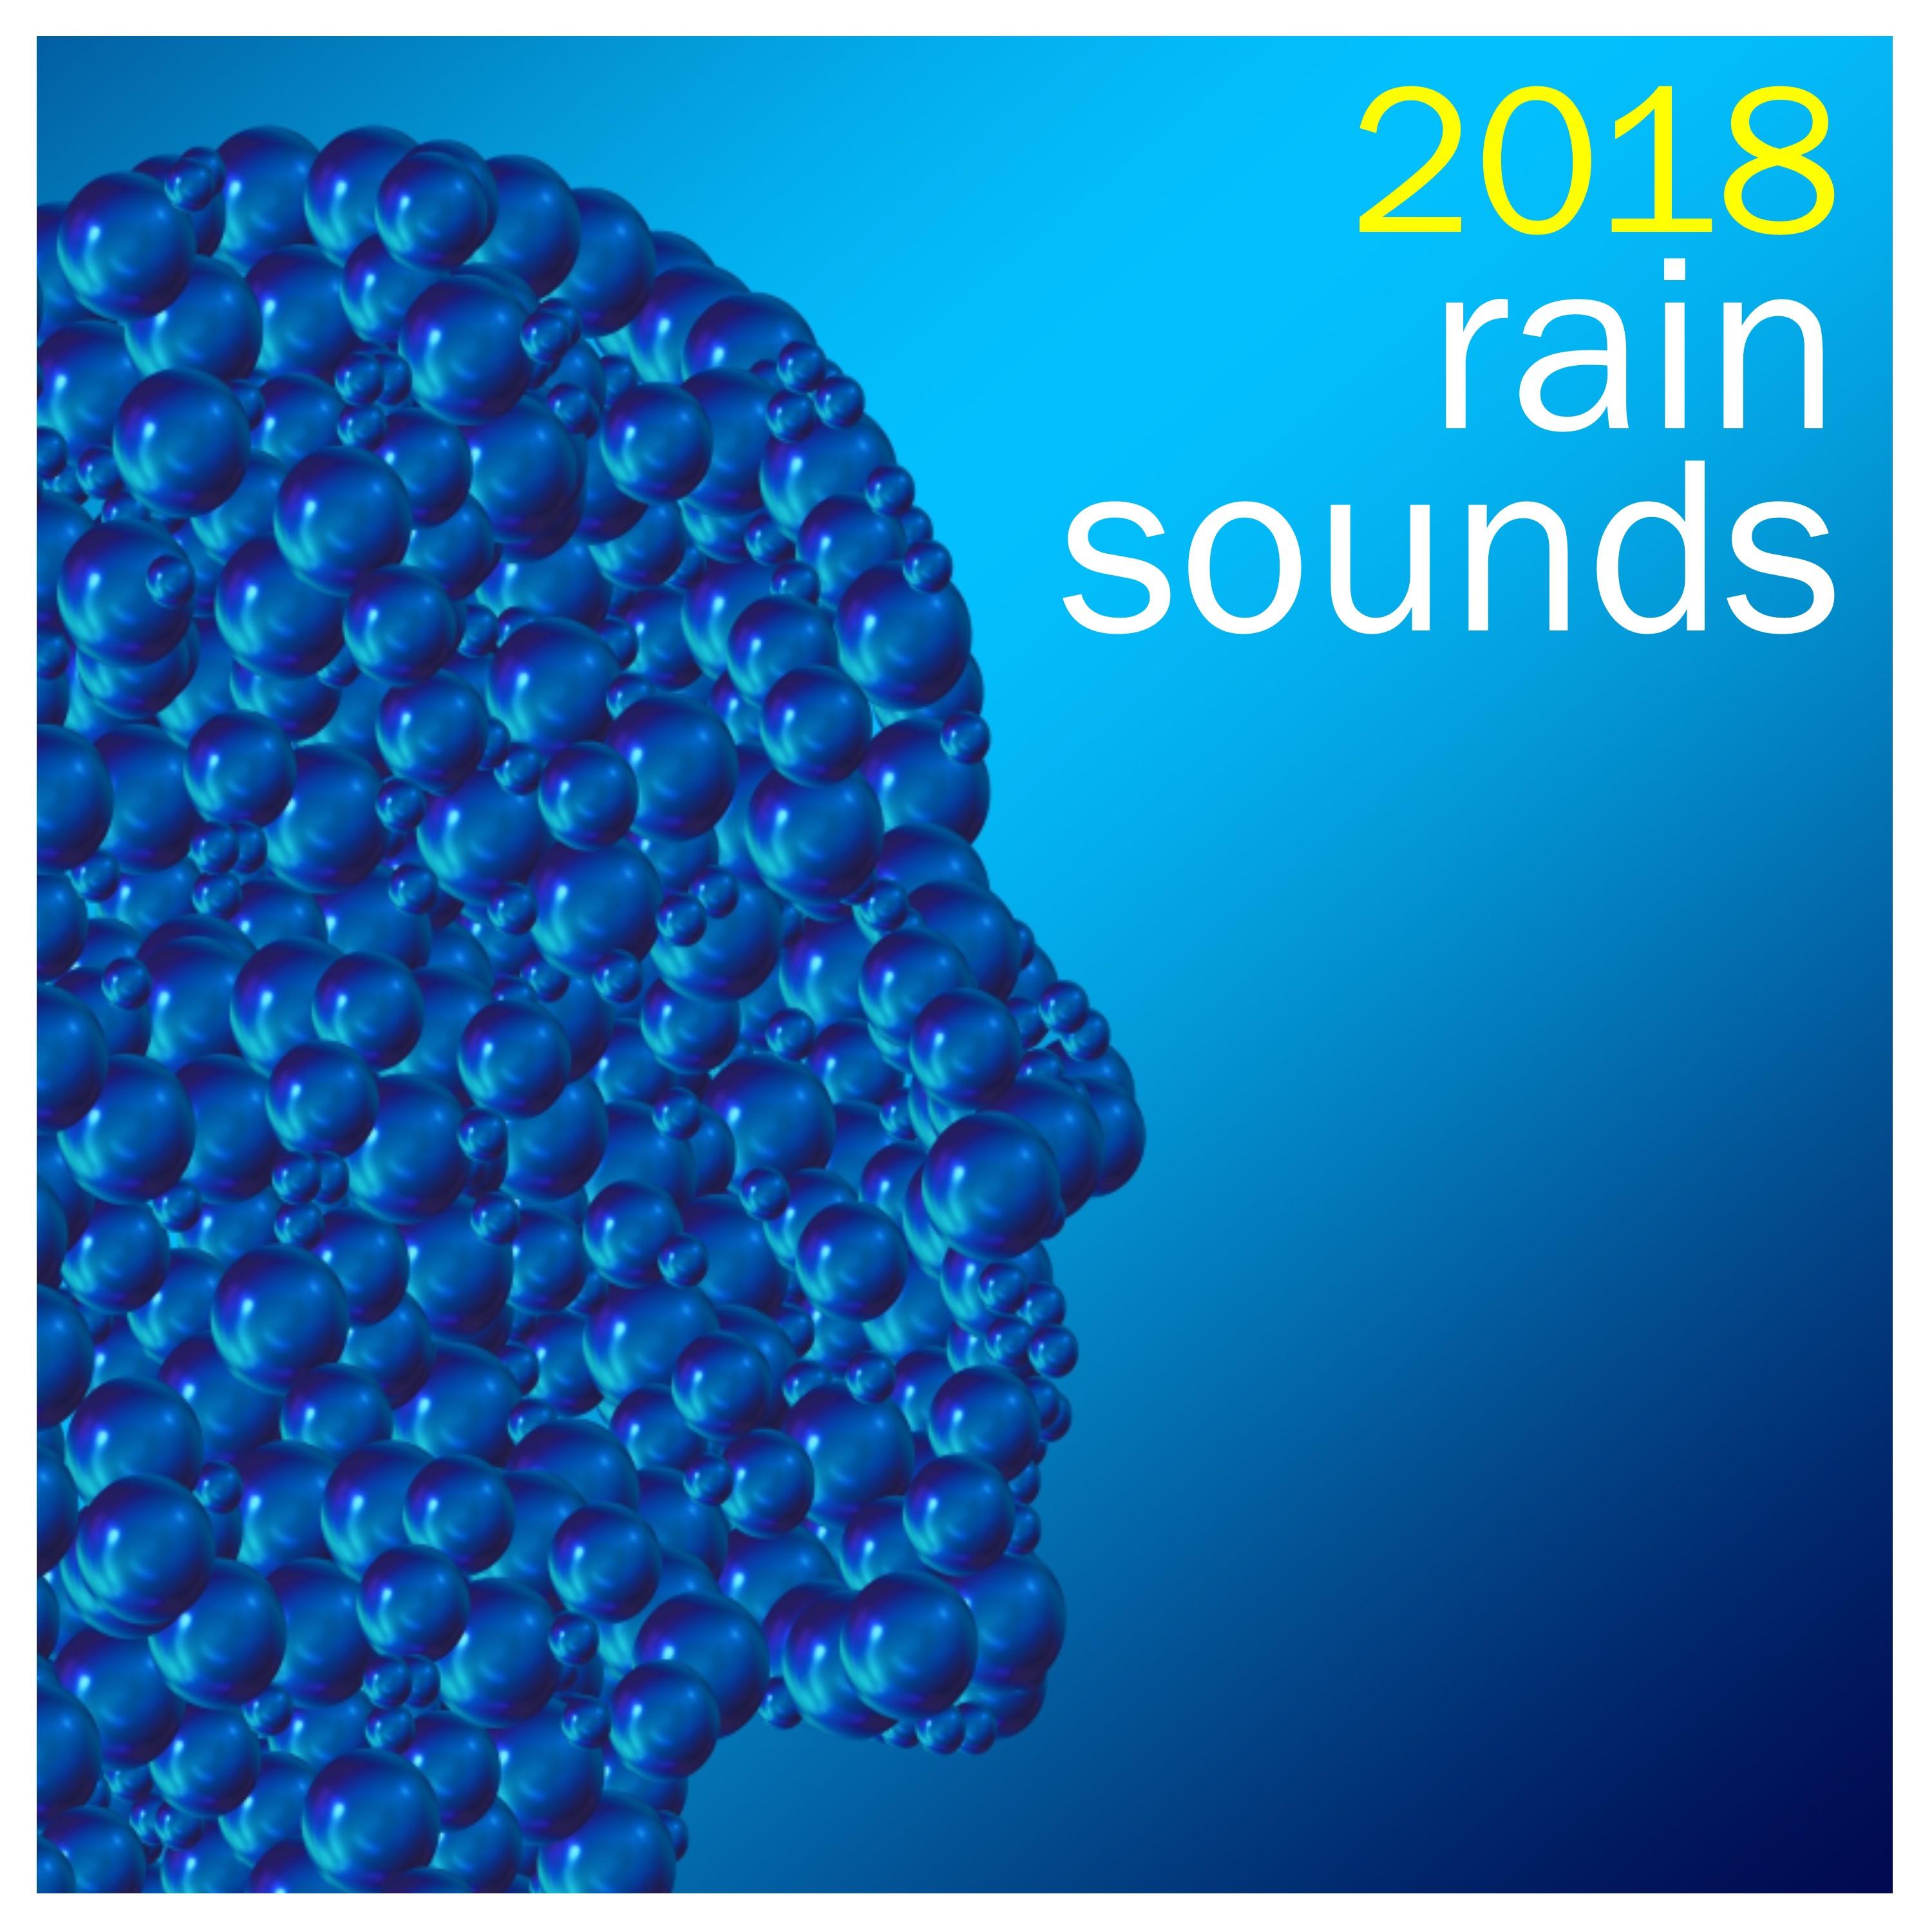 18 Rain and Nature Sounds - Sleep Peacefully, Practice Yoga or Just Relax